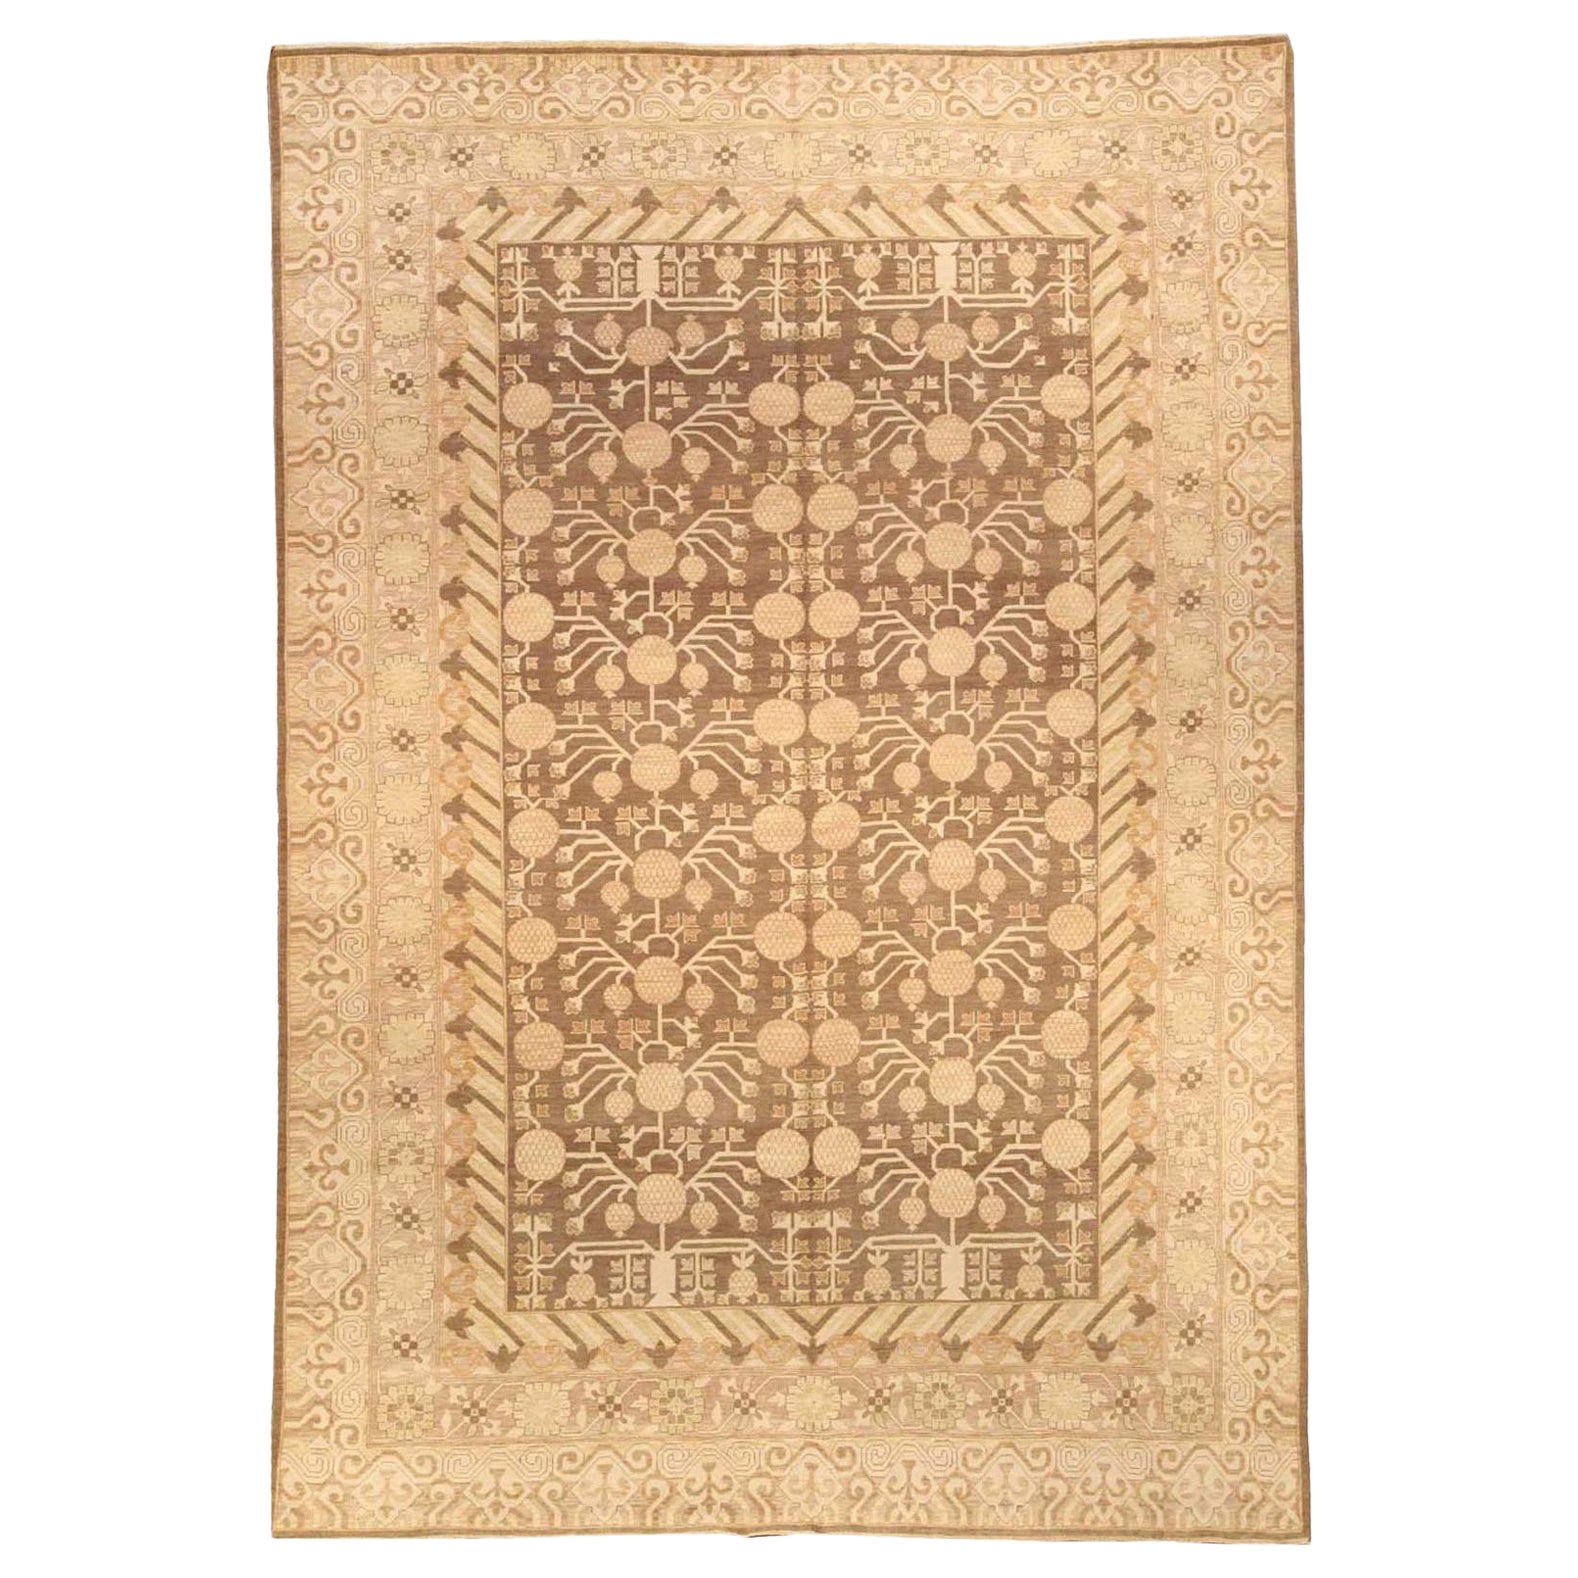 Contemporary Samarkand Beige Brown Hand Knotted Wool Rug by Doris Leslie Blau For Sale